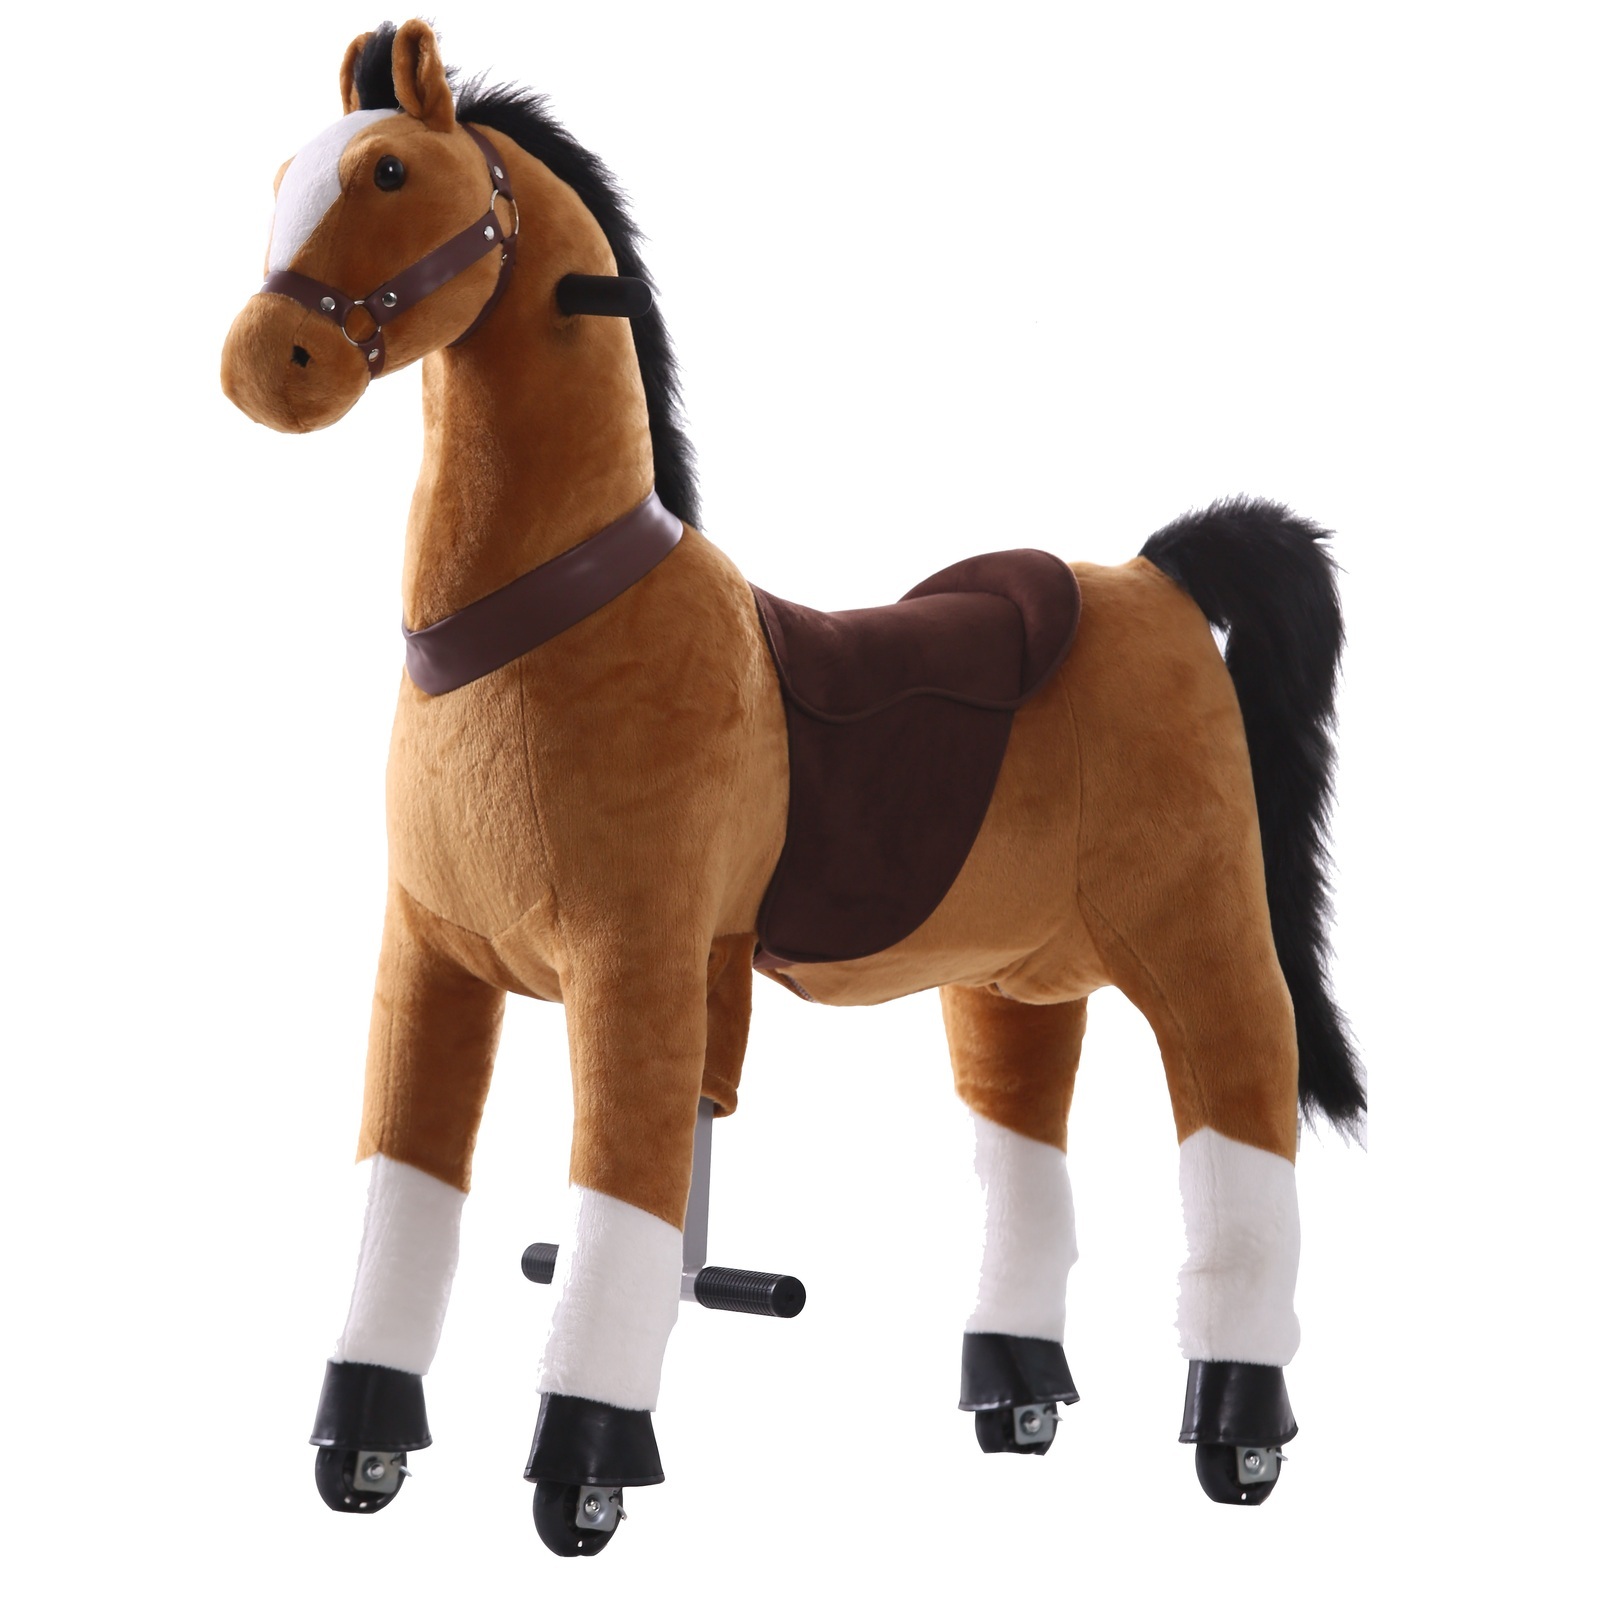 Animal Ride On Toy for Kids - Buy Online | Little Riders